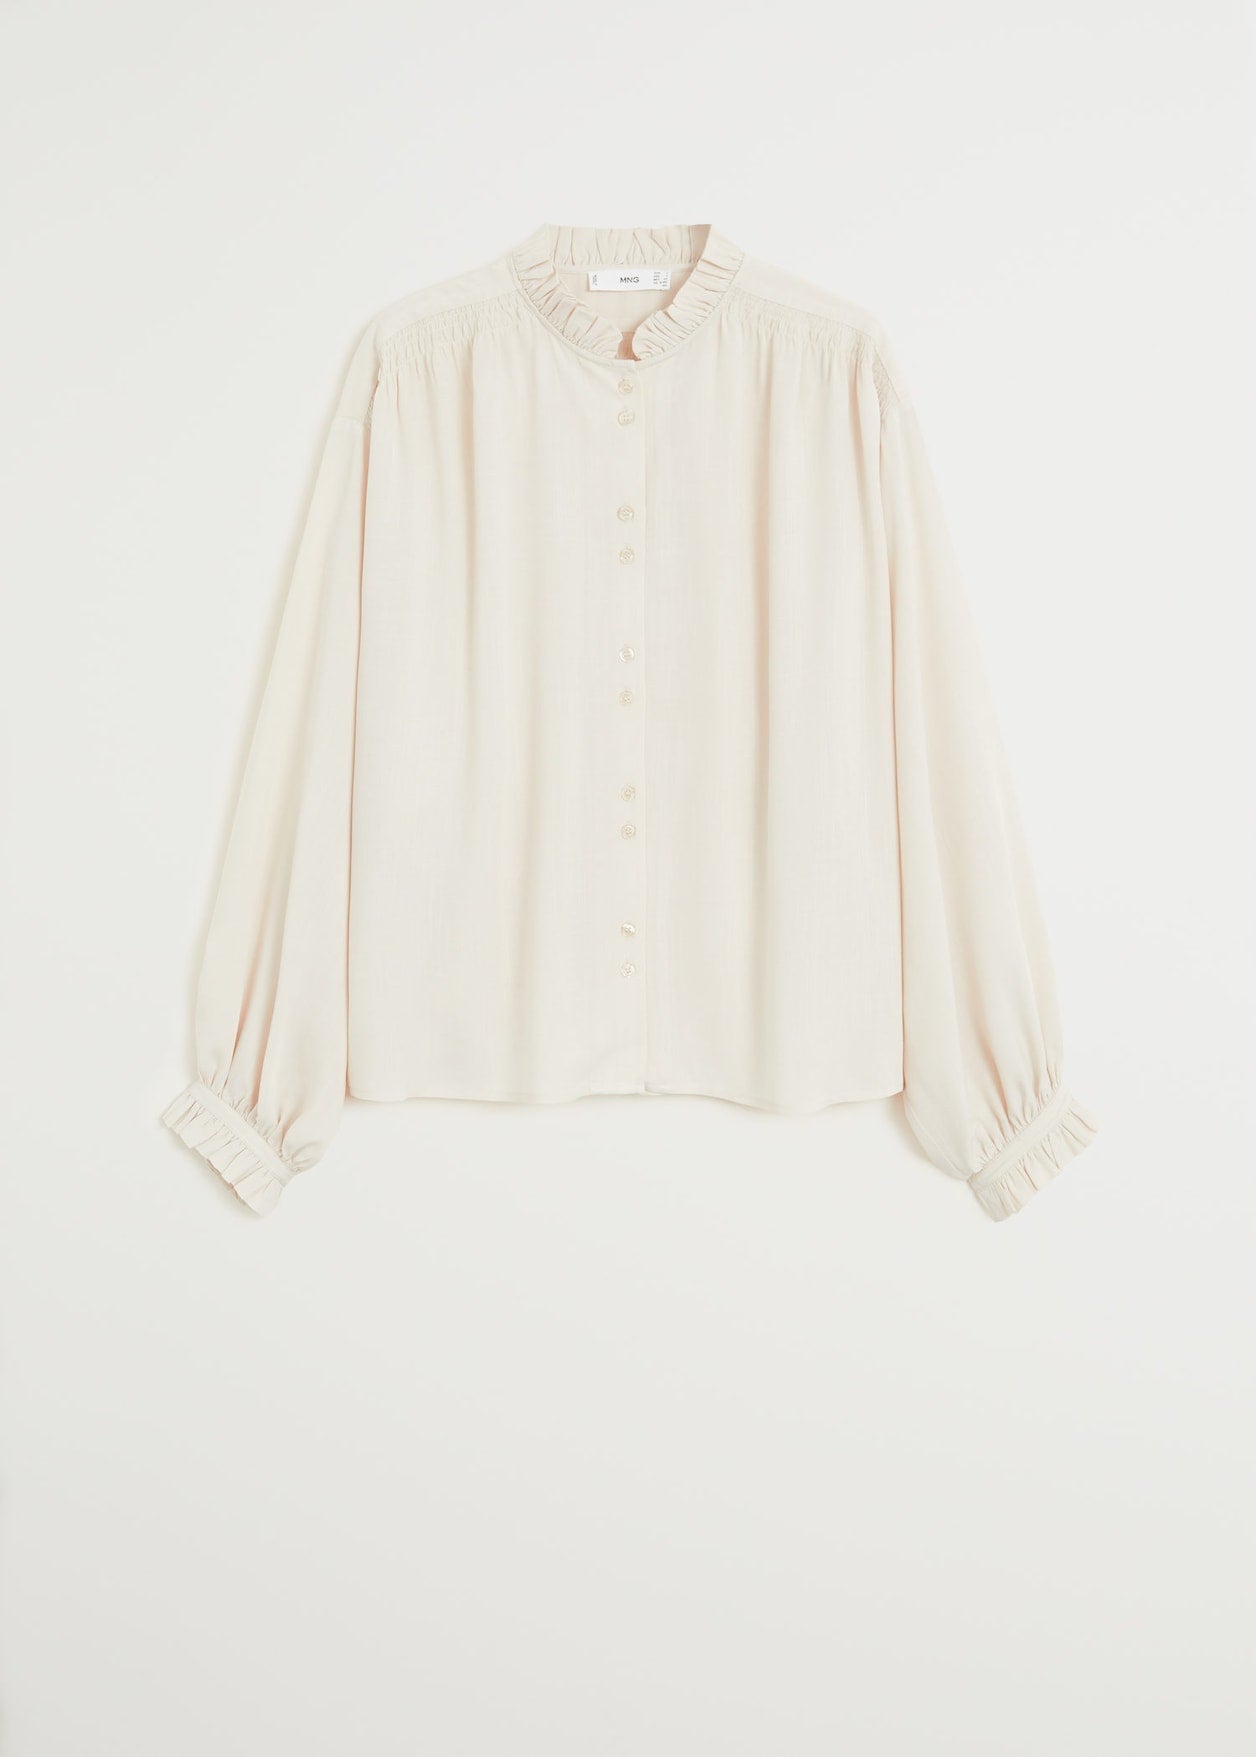 Gathered Details Blouse from Blouses collection you can buy now from Fashion And Icon online shop